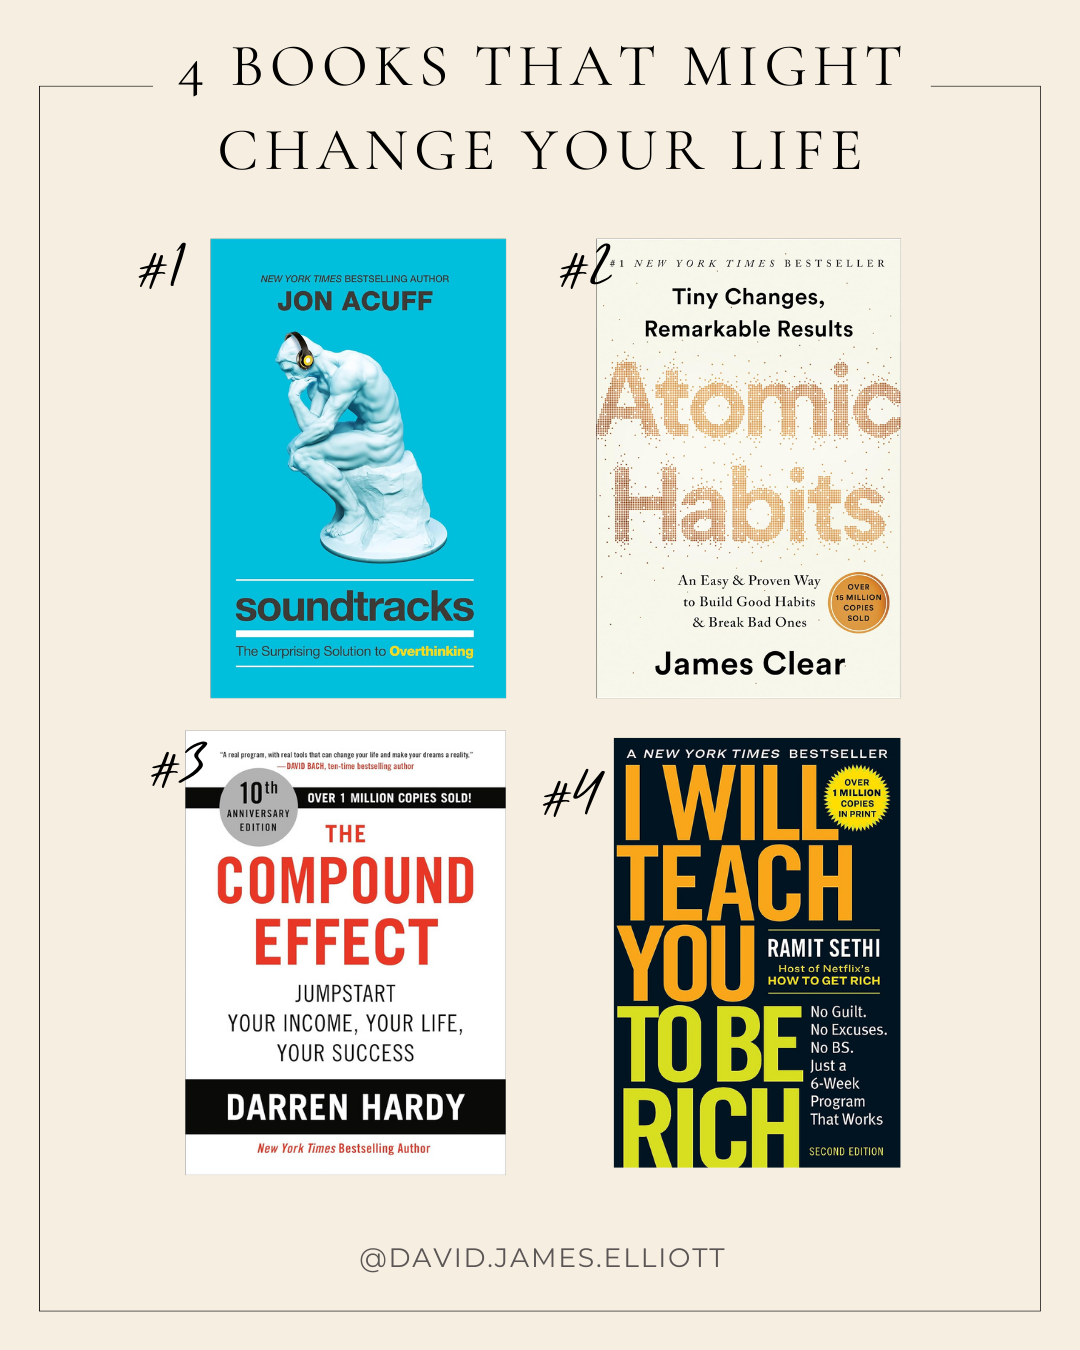 4 Books that might change your life